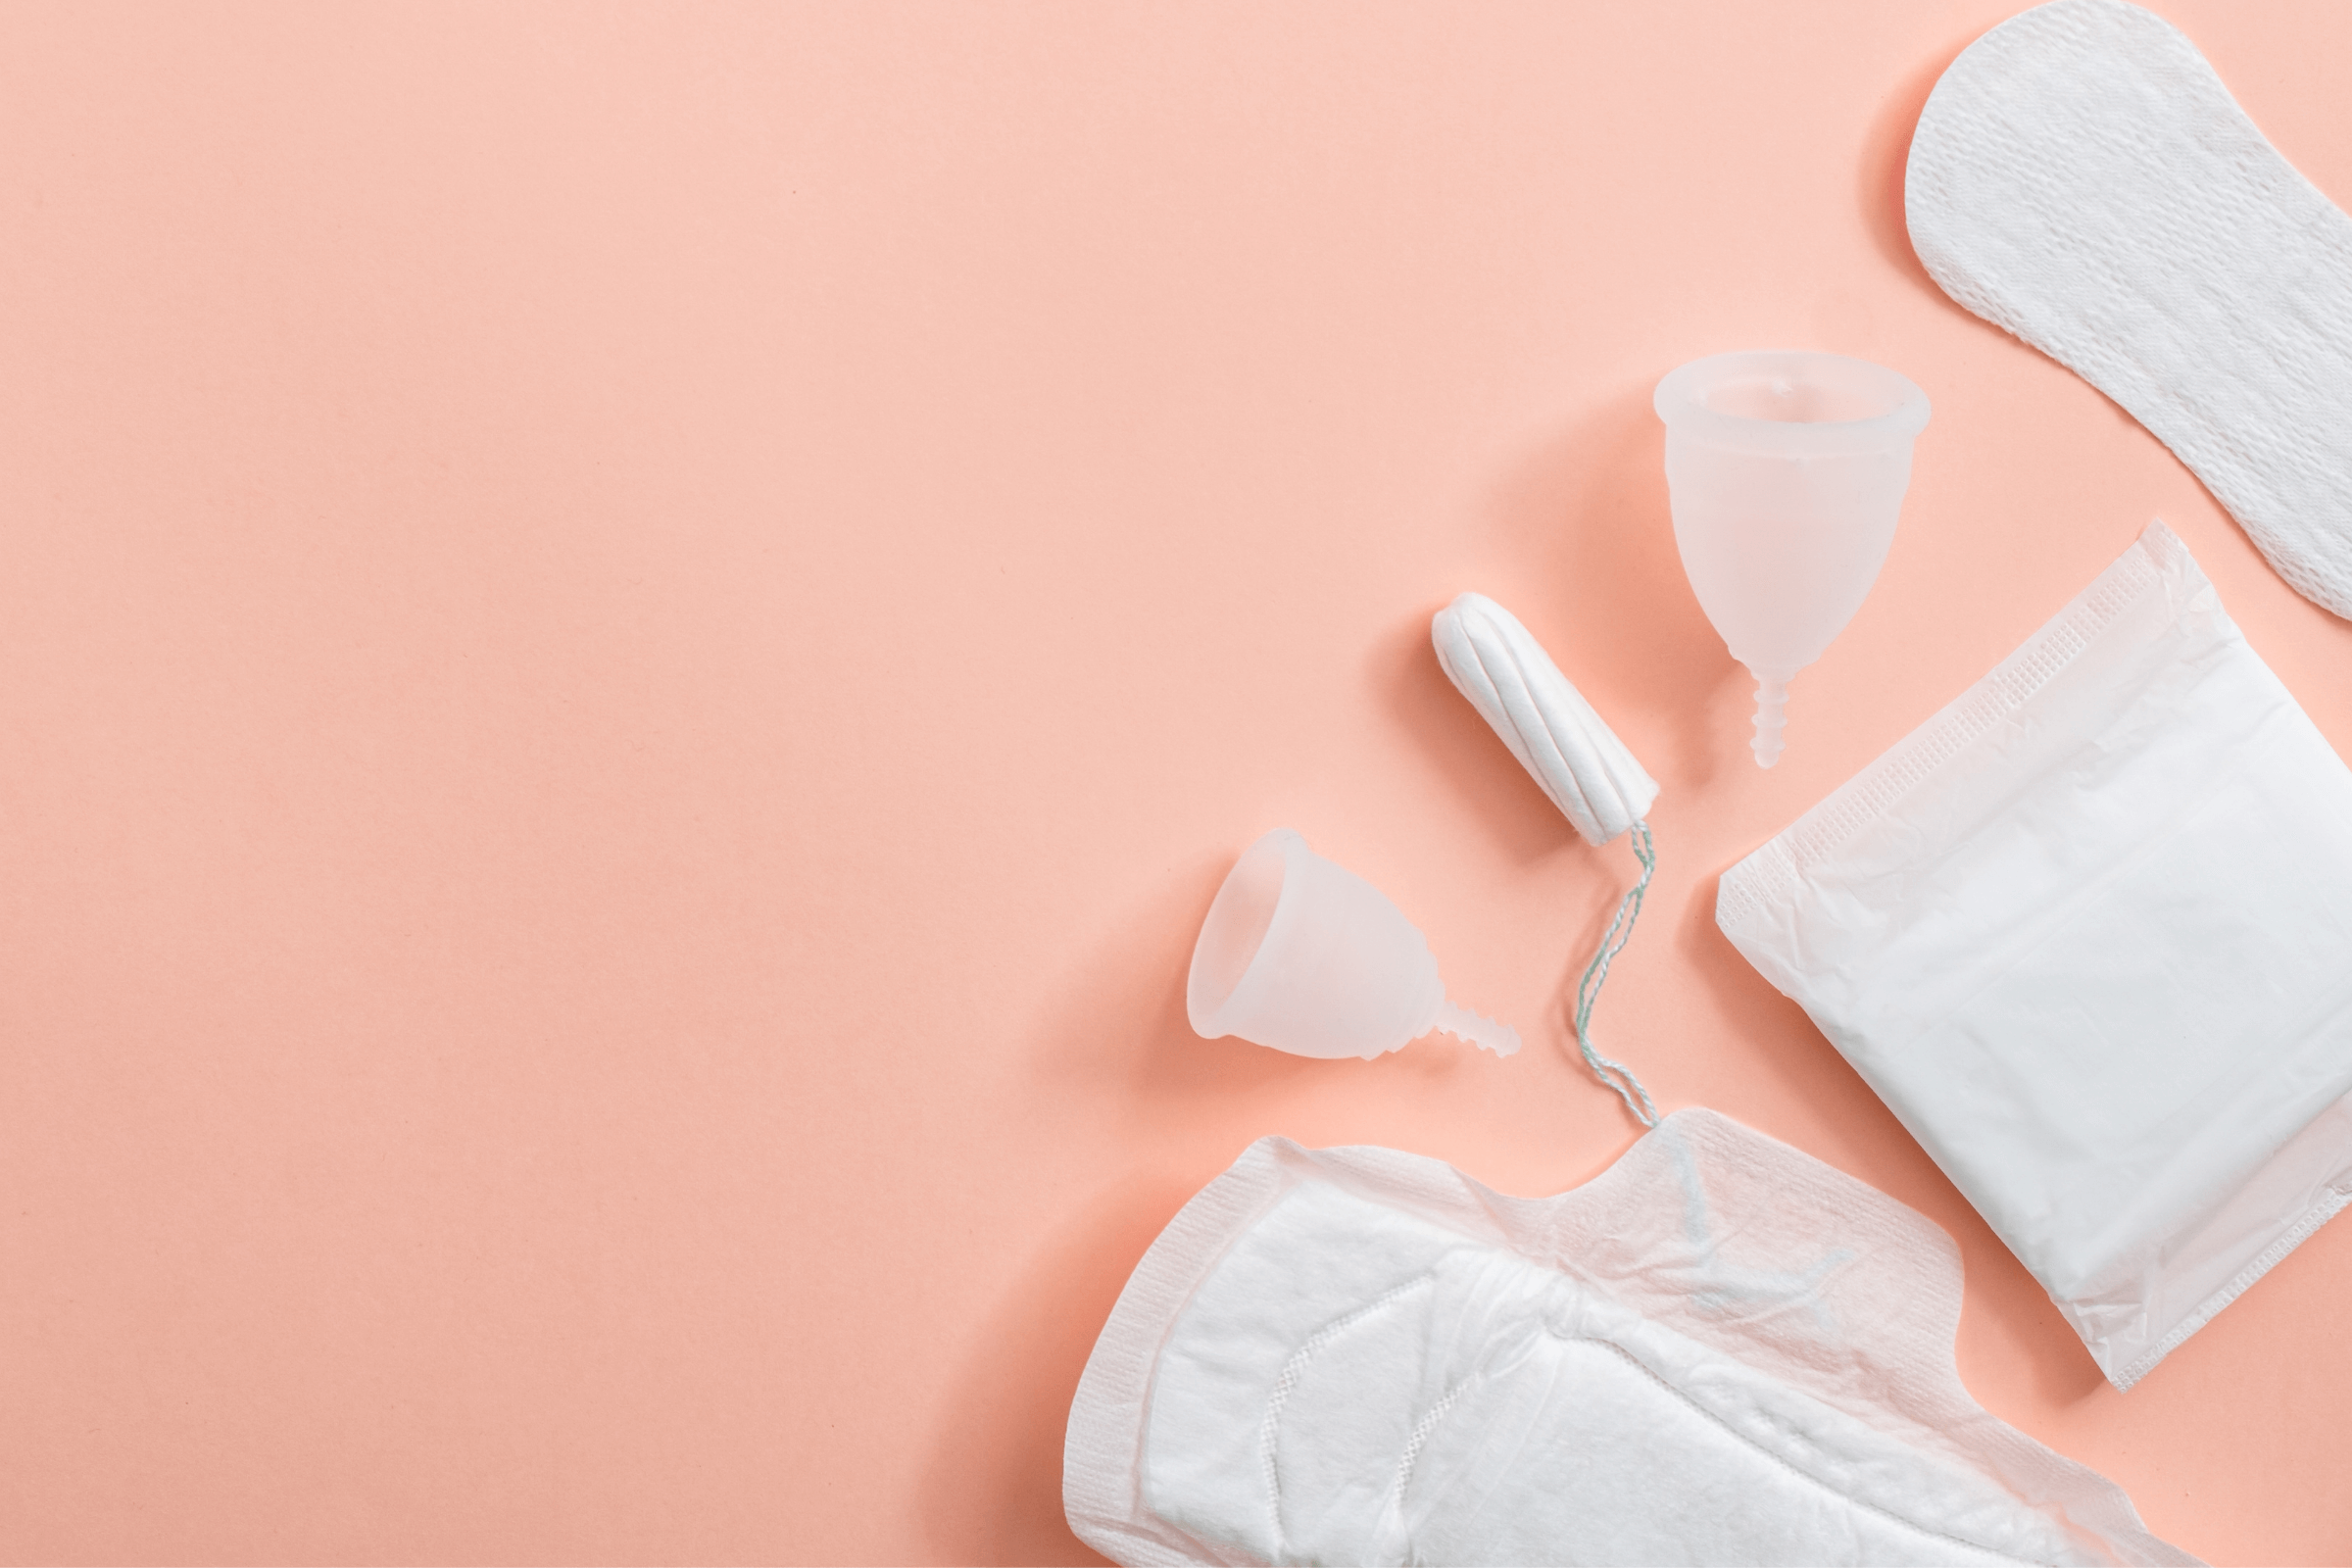 What’s in your menstrual products?